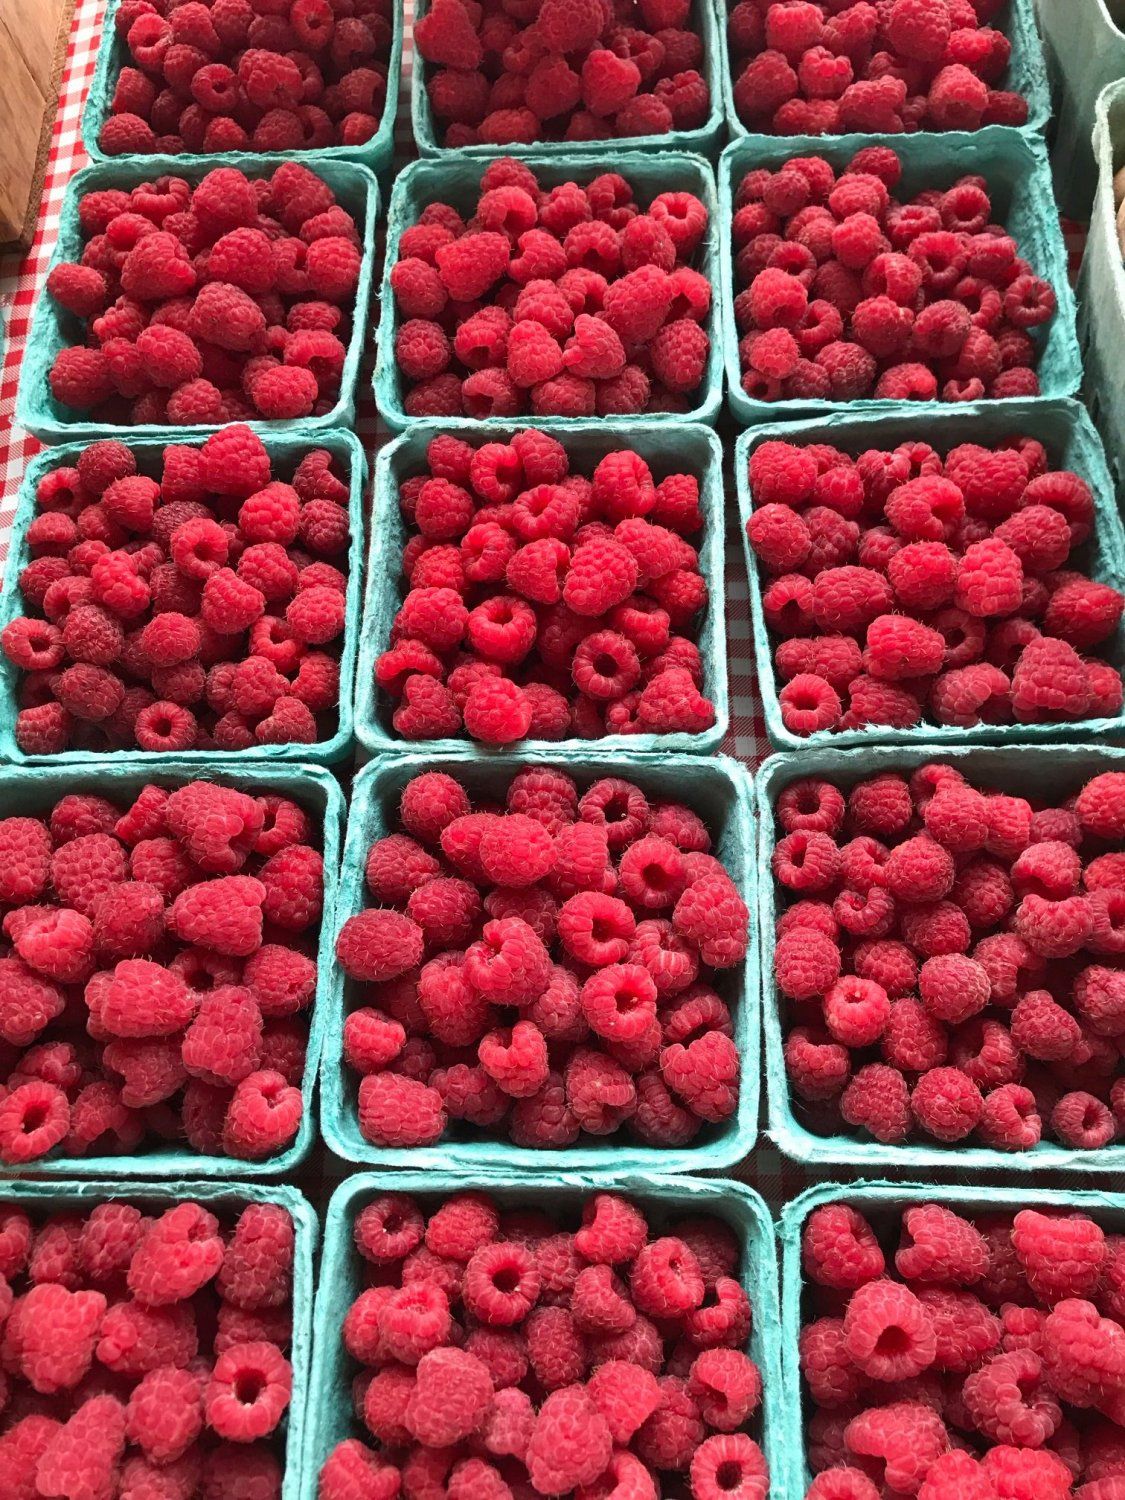 Next Happening: Raspberry Time Again!